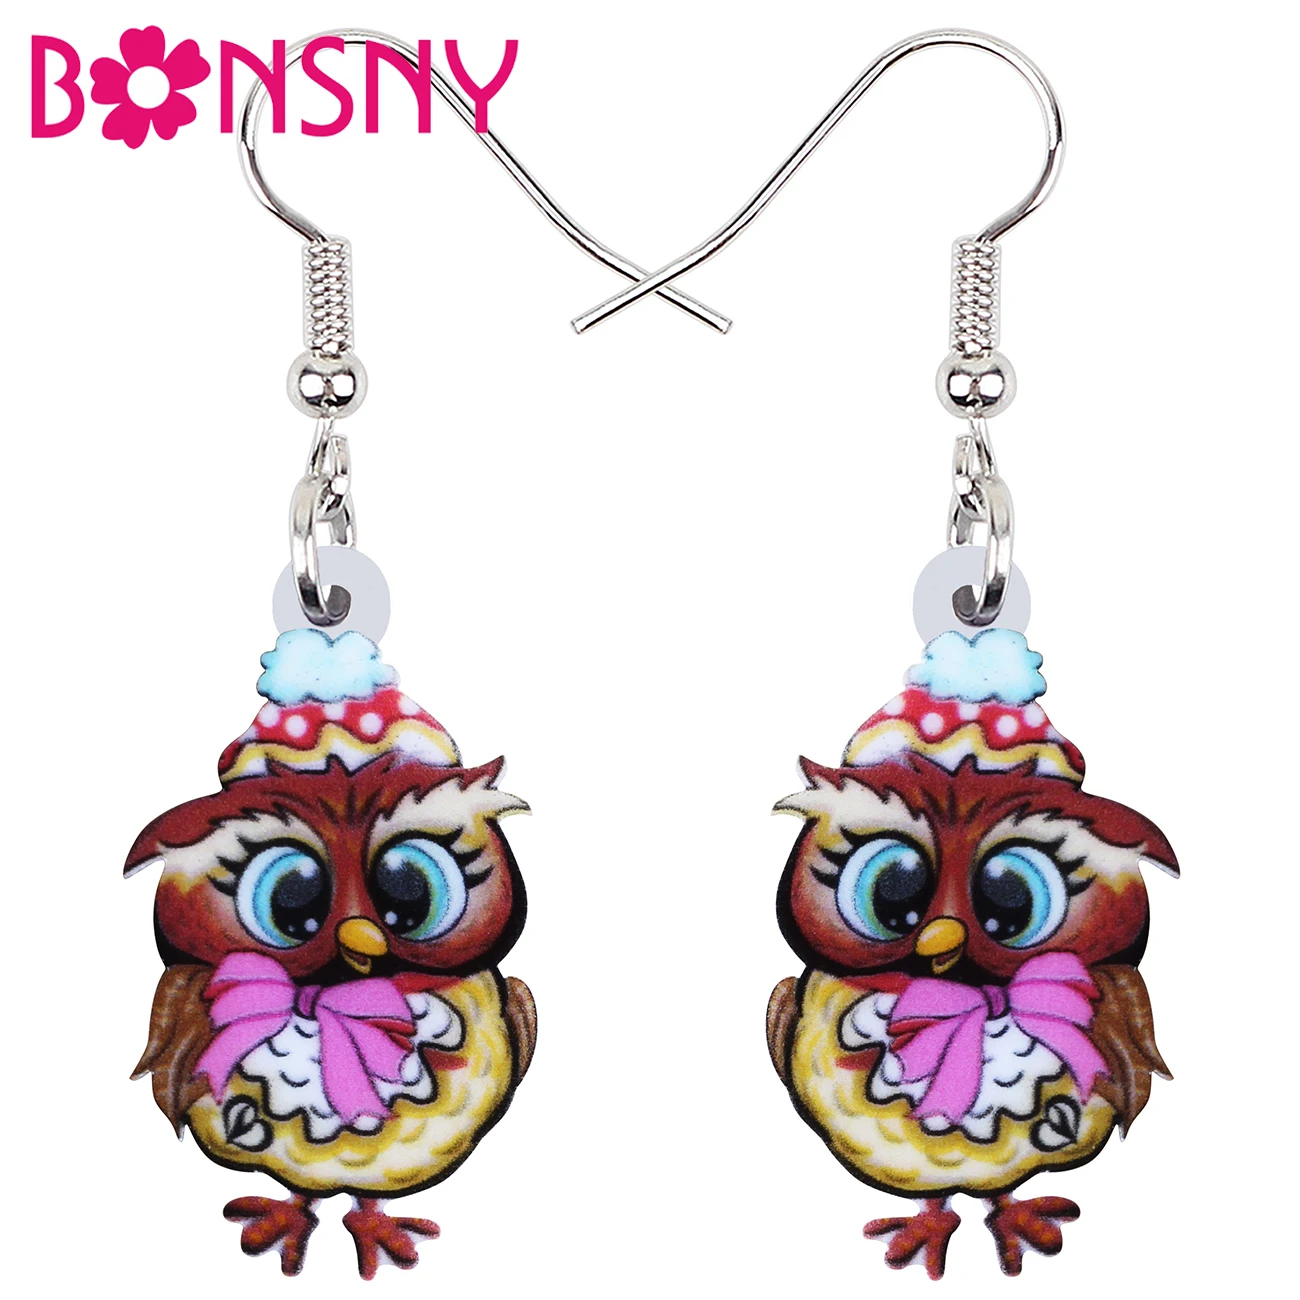 

BONSNY Acrylic Sweet Bow Knot Lady Night Owl Earrings Fashion Drop Dangle Bird Jewelry For Women Child Teens Girls Charms Gifts